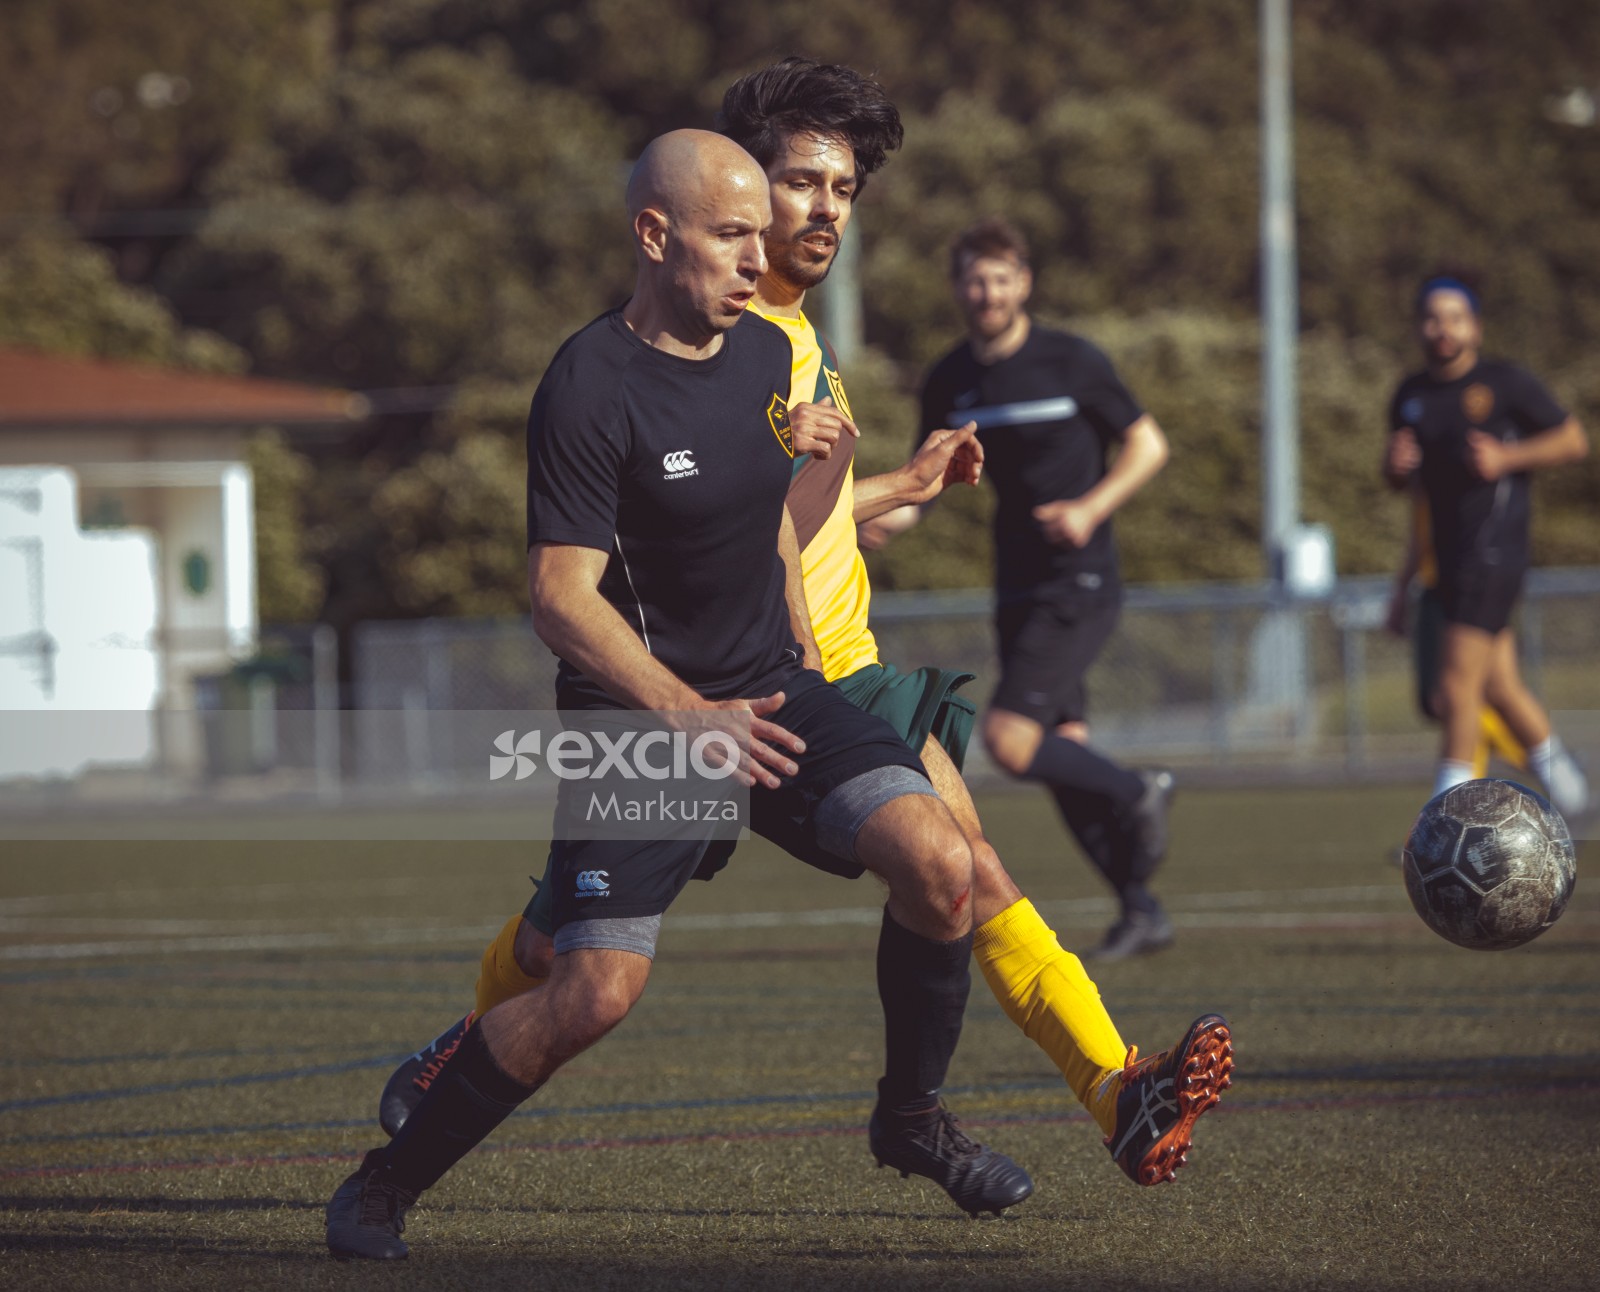 Bald football player with a cut on his knee - Sports Zone sunday league